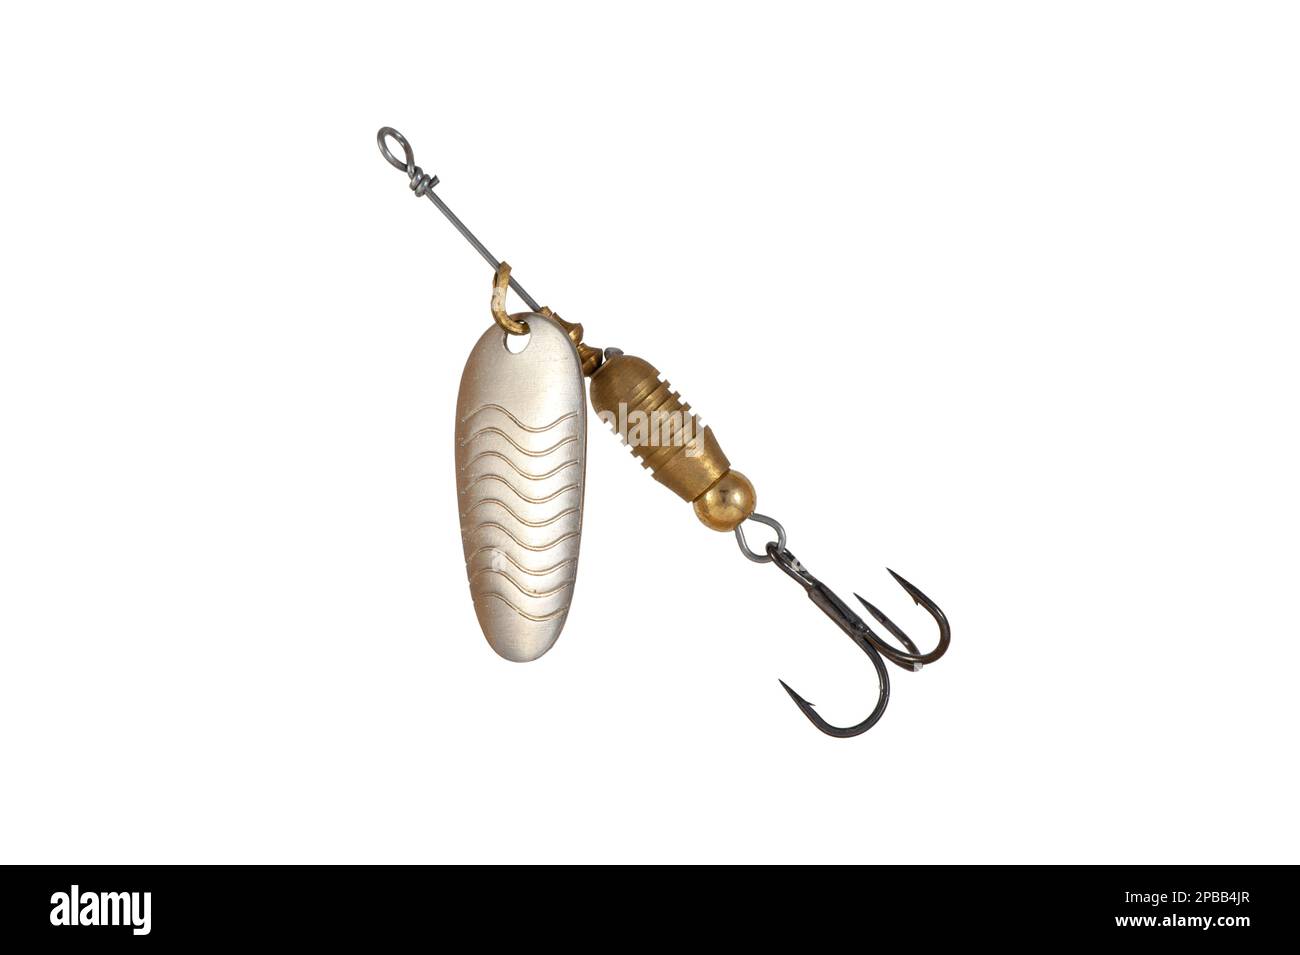 https://c8.alamy.com/comp/2PBB4JR/fishing-spinner-spoon-lure-isolated-on-white-background-tackles-for-catching-of-fishes-2PBB4JR.jpg